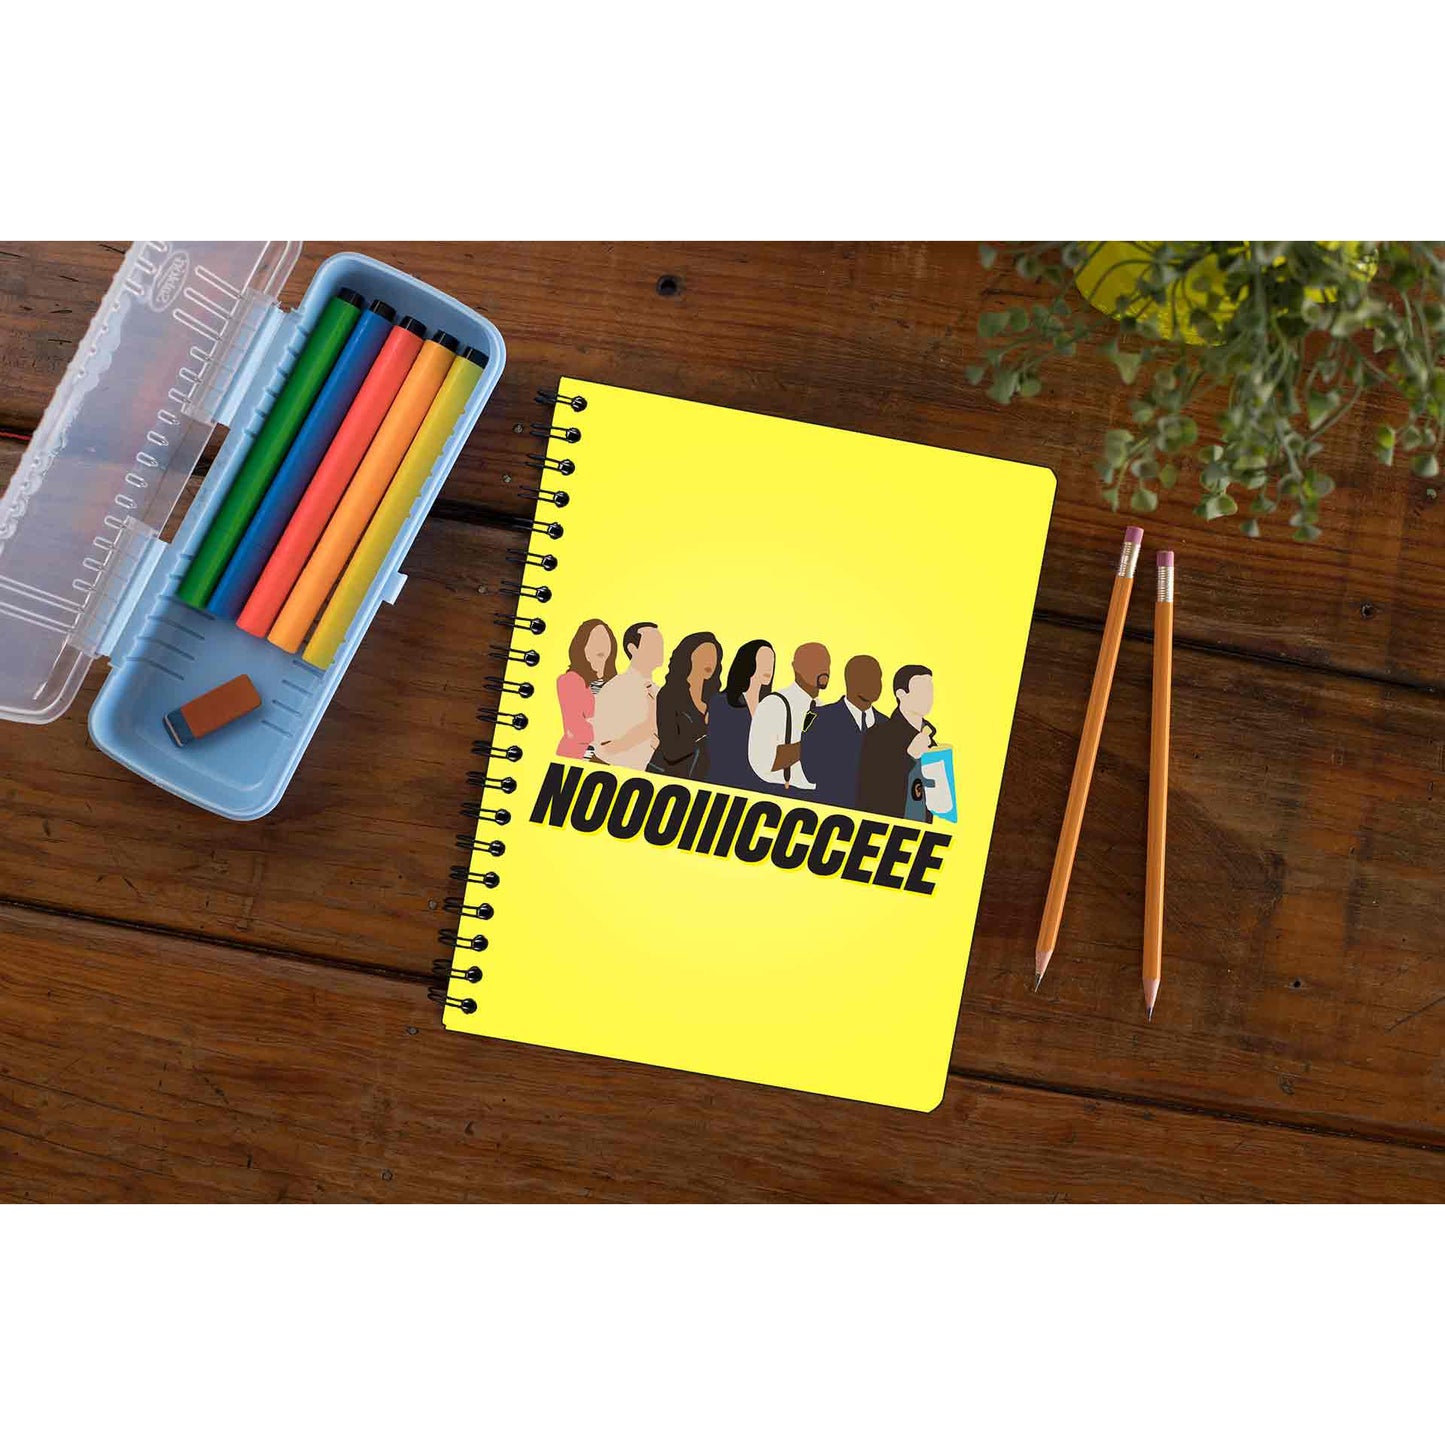 brooklyn nine-nine noooiiiccceee notebook notepad diary buy online india the banyan tee tbt unruled detective jake peralta terry charles boyle gina linetti andy samberg merchandise clothing acceessories